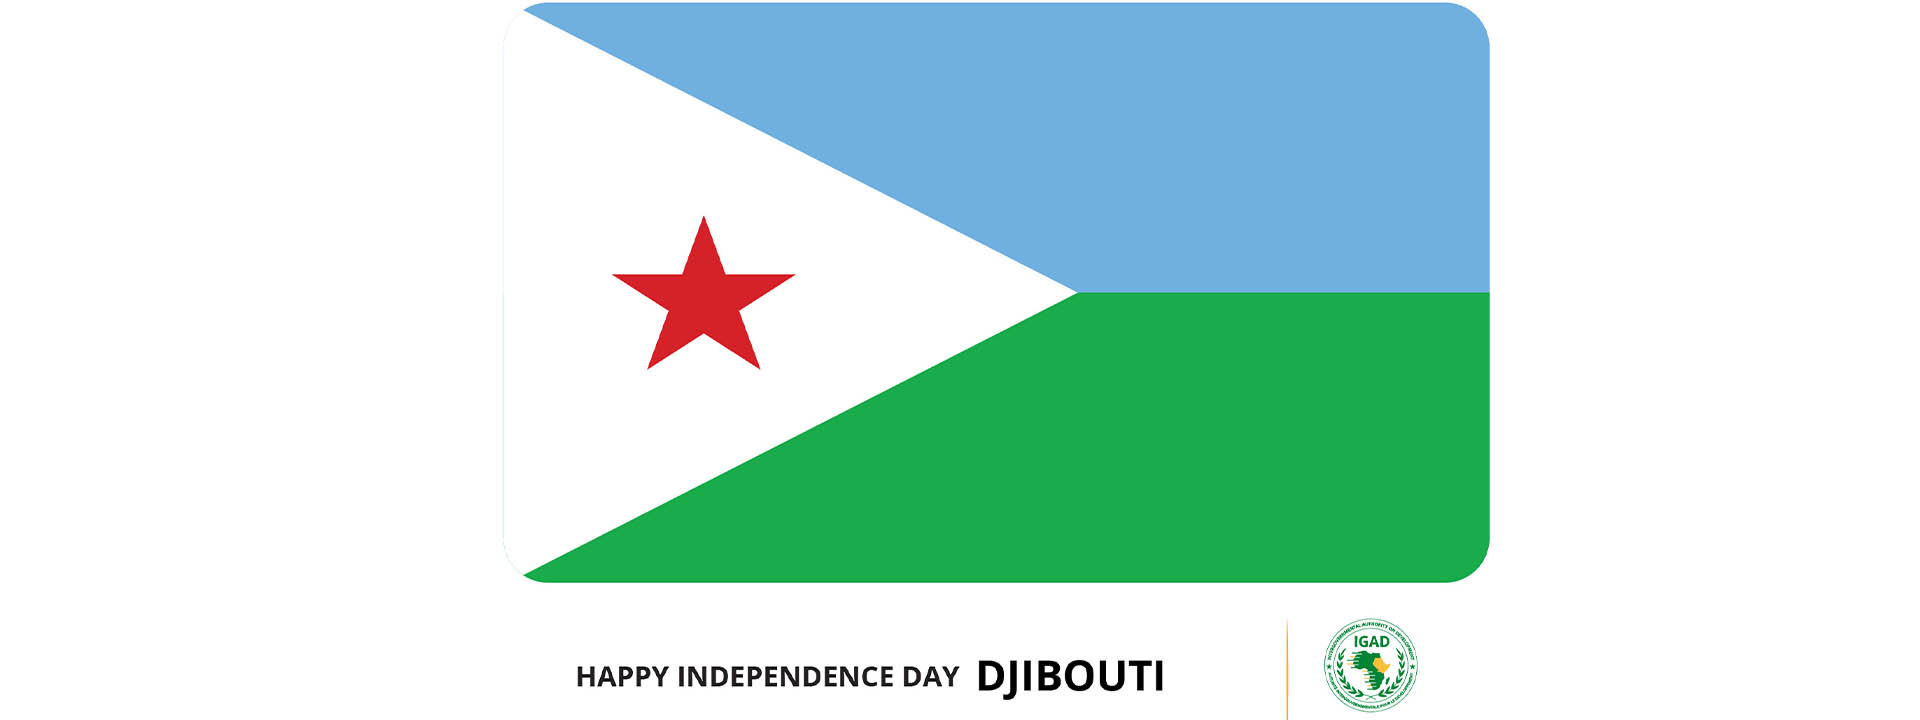 Happy Independence Day Djibouti